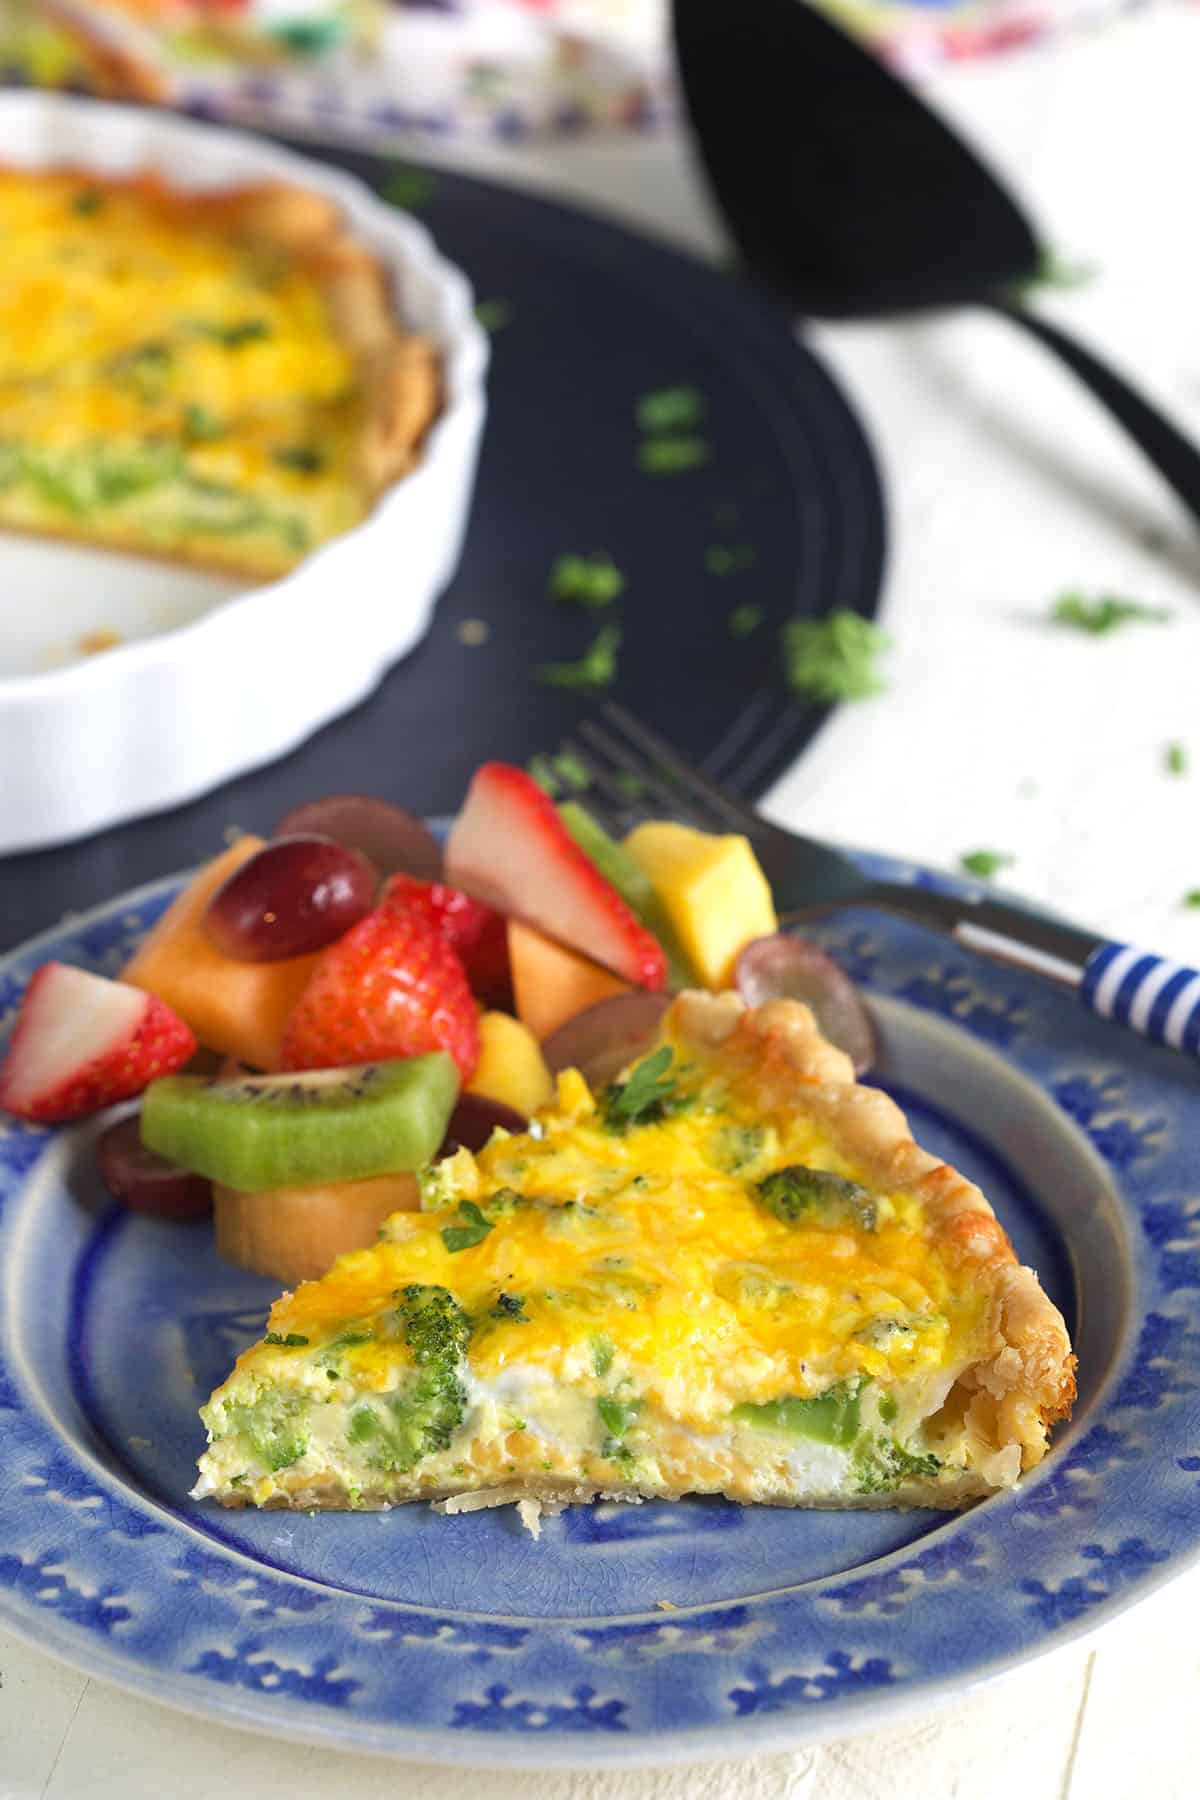 A slice of quiche is presented on a blue and white plate next to a serving of mixed fruit.